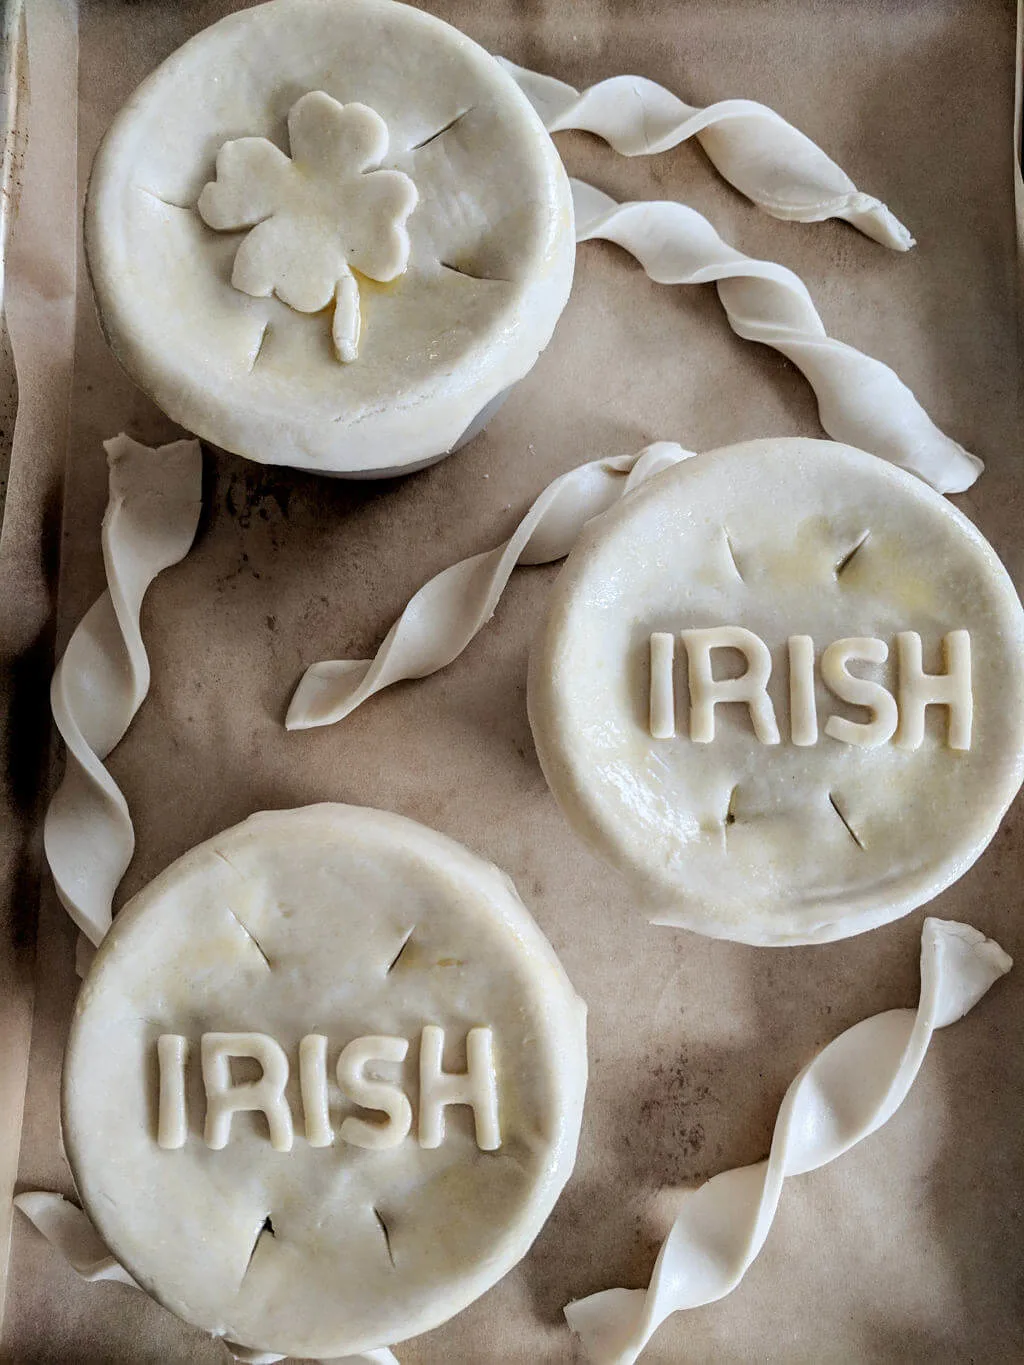 Pot pies for St. Patrick's Day